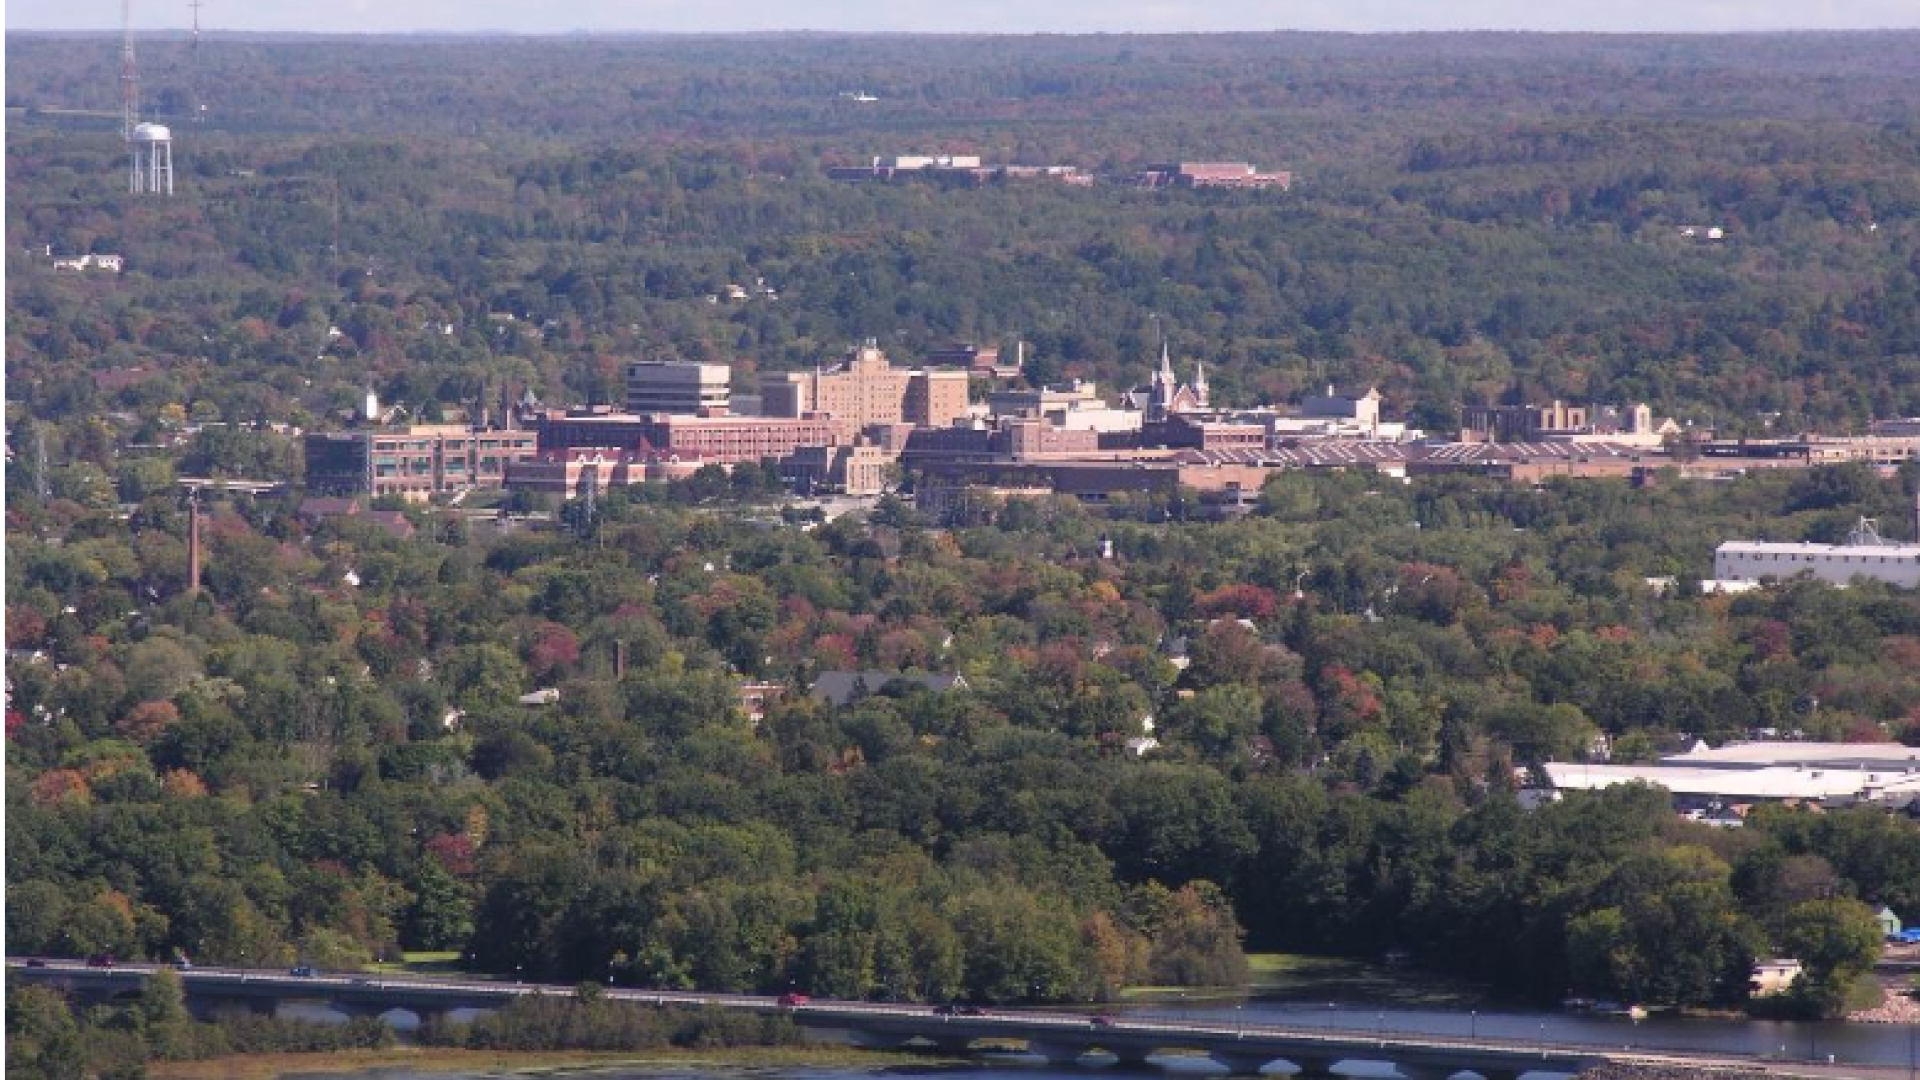 A university from a distance